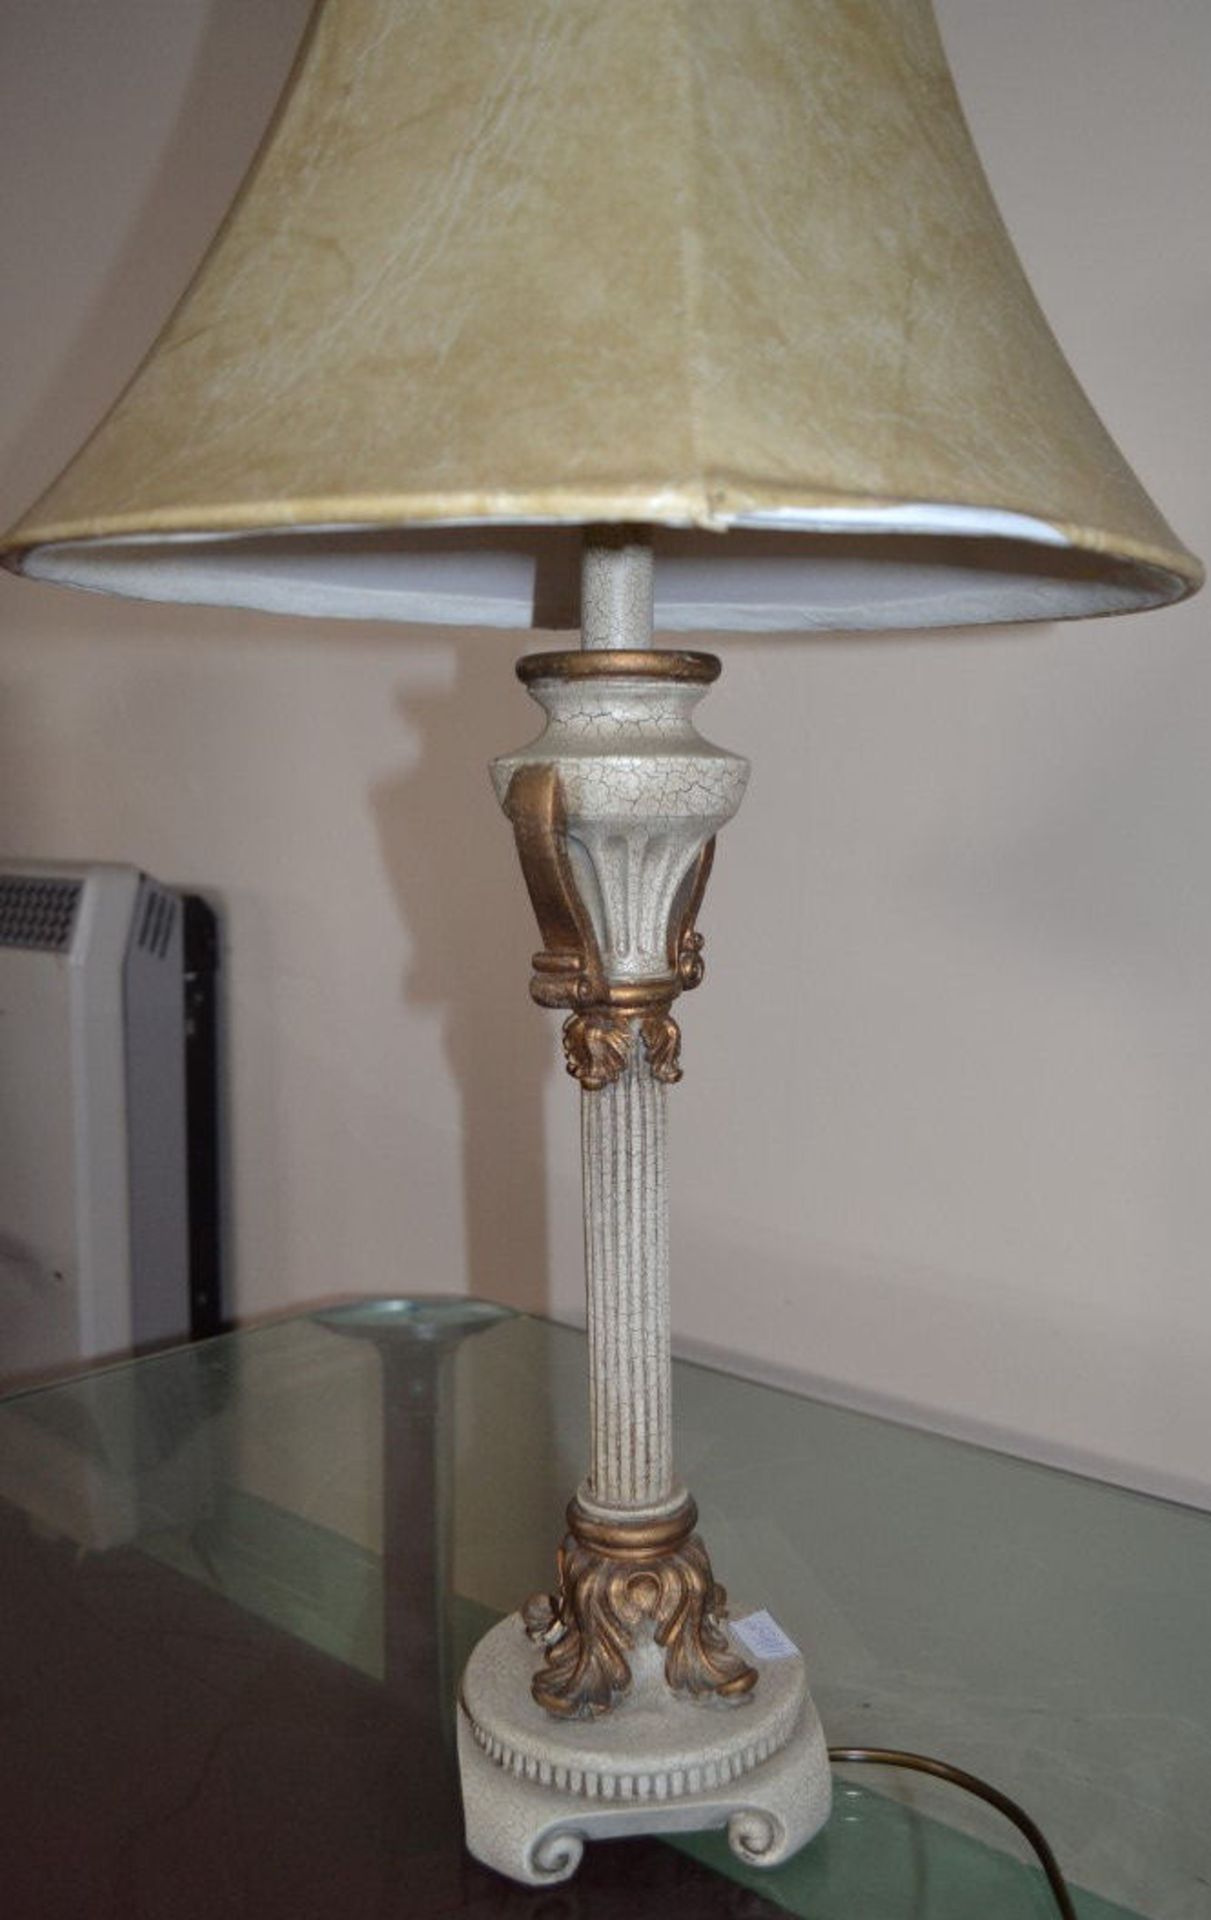 1 x Greek Column Style Lamp. 68.5cm Tall. Base Is 12.5cm Square. Lampshade Diameter 35cm. - Image 4 of 5